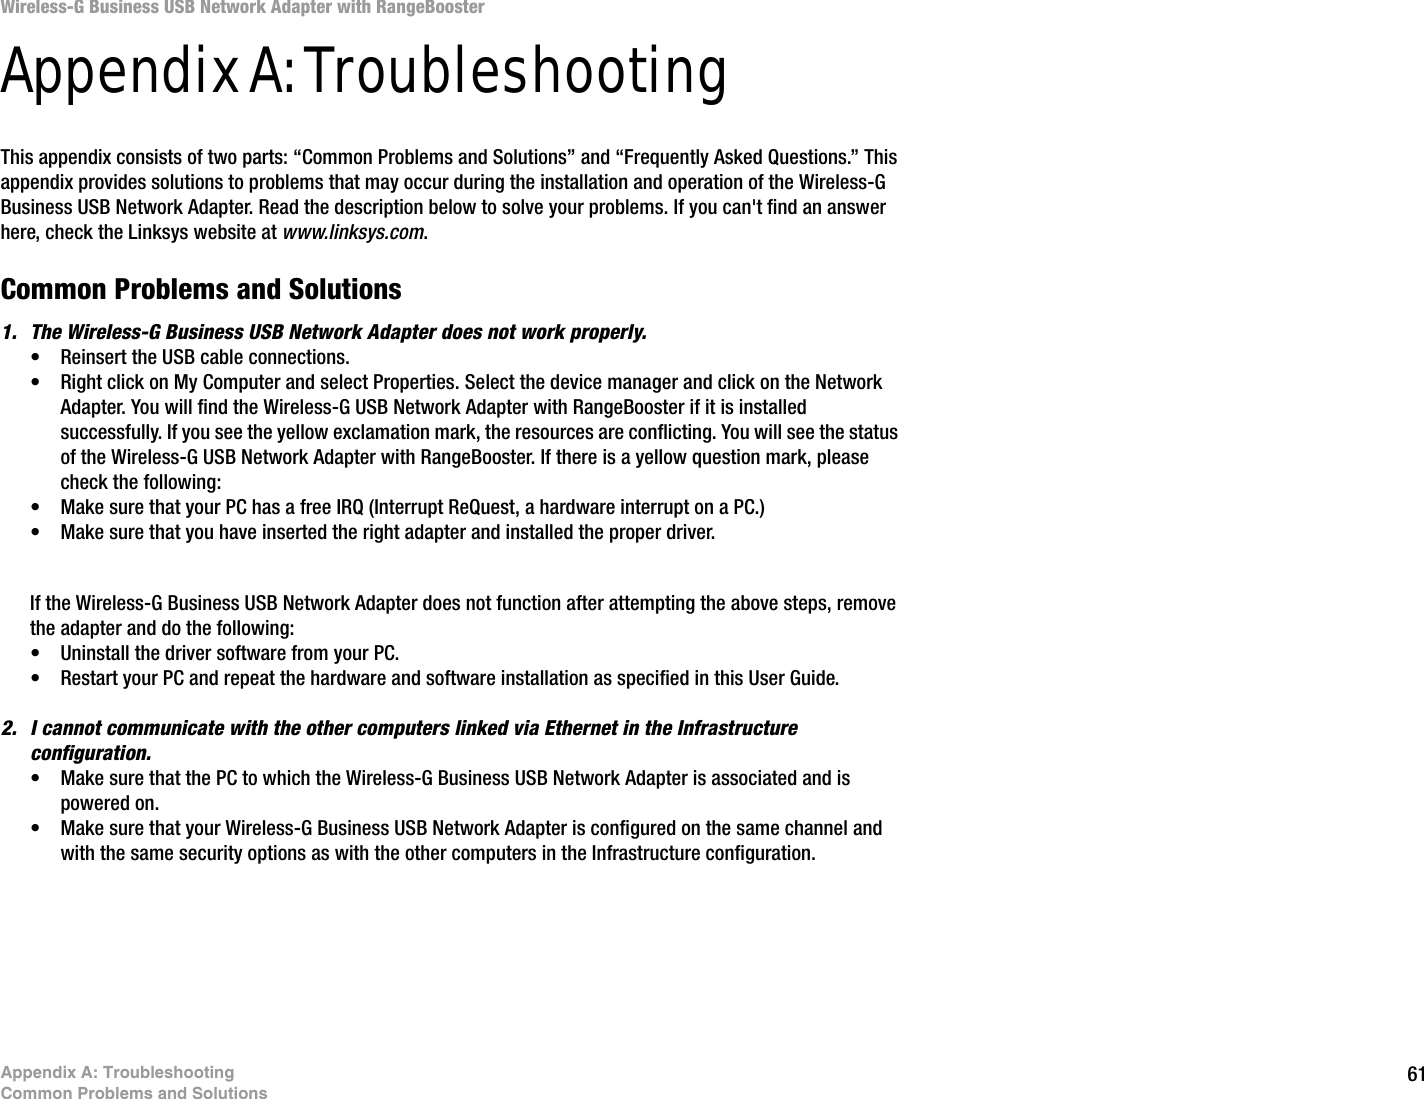 61Appendix A: TroubleshootingCommon Problems and SolutionsWireless-G Business USB Network Adapter with RangeBoosterAppendix A: TroubleshootingThis appendix consists of two parts: “Common Problems and Solutions” and “Frequently Asked Questions.” This appendix provides solutions to problems that may occur during the installation and operation of the Wireless-G Business USB Network Adapter. Read the description below to solve your problems. If you can&apos;t find an answer here, check the Linksys website at www.linksys.com.Common Problems and Solutions1. The Wireless-G Business USB Network Adapter does not work properly.• Reinsert the USB cable connections.• Right click on My Computer and select Properties. Select the device manager and click on the Network Adapter. You will find the Wireless-G USB Network Adapter with RangeBooster if it is installed successfully. If you see the yellow exclamation mark, the resources are conflicting. You will see the status of the Wireless-G USB Network Adapter with RangeBooster. If there is a yellow question mark, please check the following:• Make sure that your PC has a free IRQ (Interrupt ReQuest, a hardware interrupt on a PC.) • Make sure that you have inserted the right adapter and installed the proper driver.If the Wireless-G Business USB Network Adapter does not function after attempting the above steps, remove the adapter and do the following:• Uninstall the driver software from your PC.• Restart your PC and repeat the hardware and software installation as specified in this User Guide.2. I cannot communicate with the other computers linked via Ethernet in the Infrastructure configuration.• Make sure that the PC to which the Wireless-G Business USB Network Adapter is associated and is powered on.• Make sure that your Wireless-G Business USB Network Adapter is configured on the same channel and with the same security options as with the other computers in the Infrastructure configuration. 